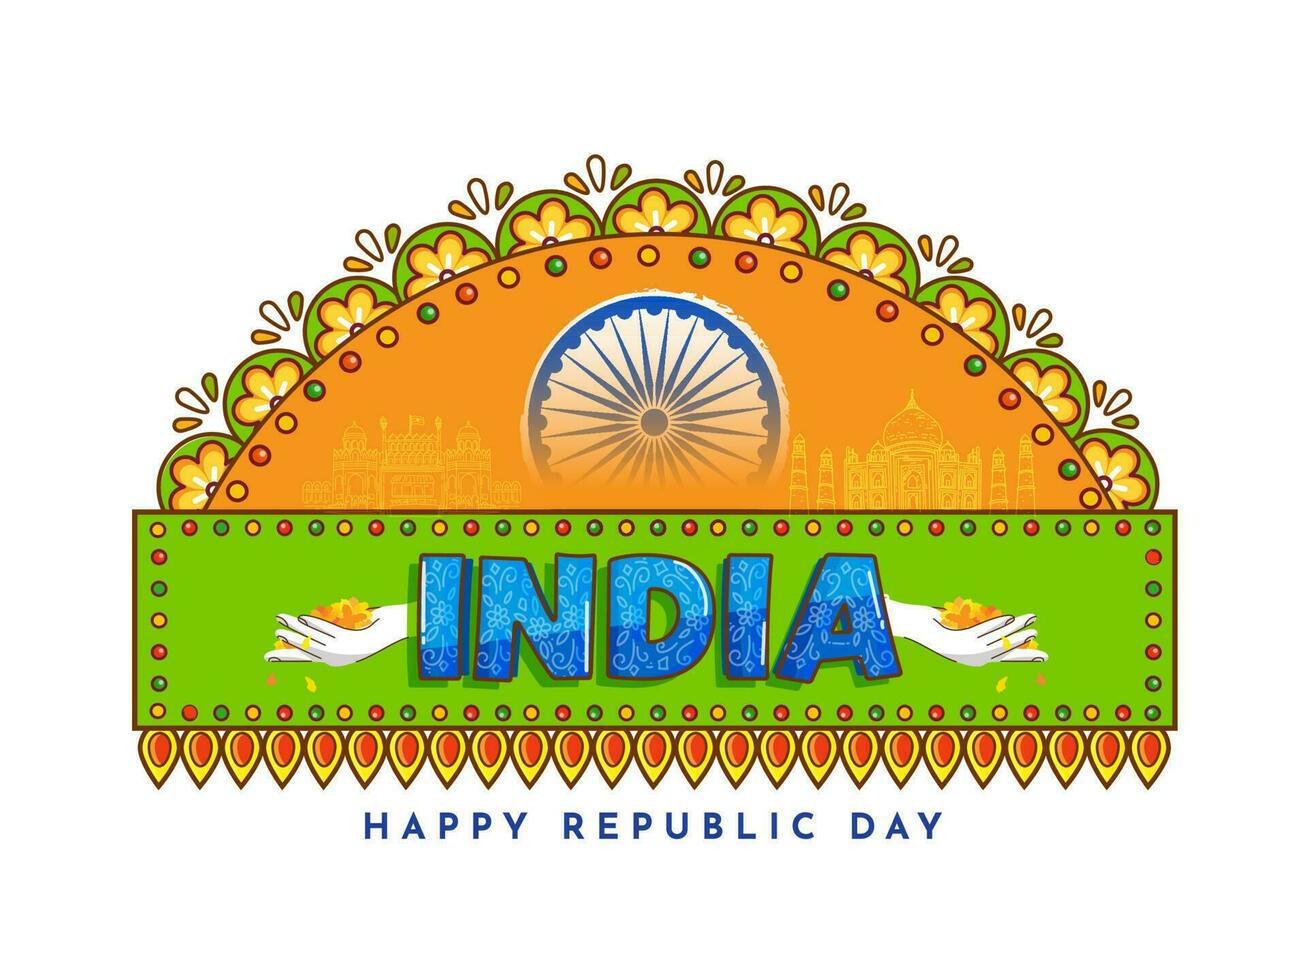 India Happy Republic Day Font With Flowers Falling From Hands, Ashoka Wheel, Famous Monuments On Saffron And Green Floral Background. vector